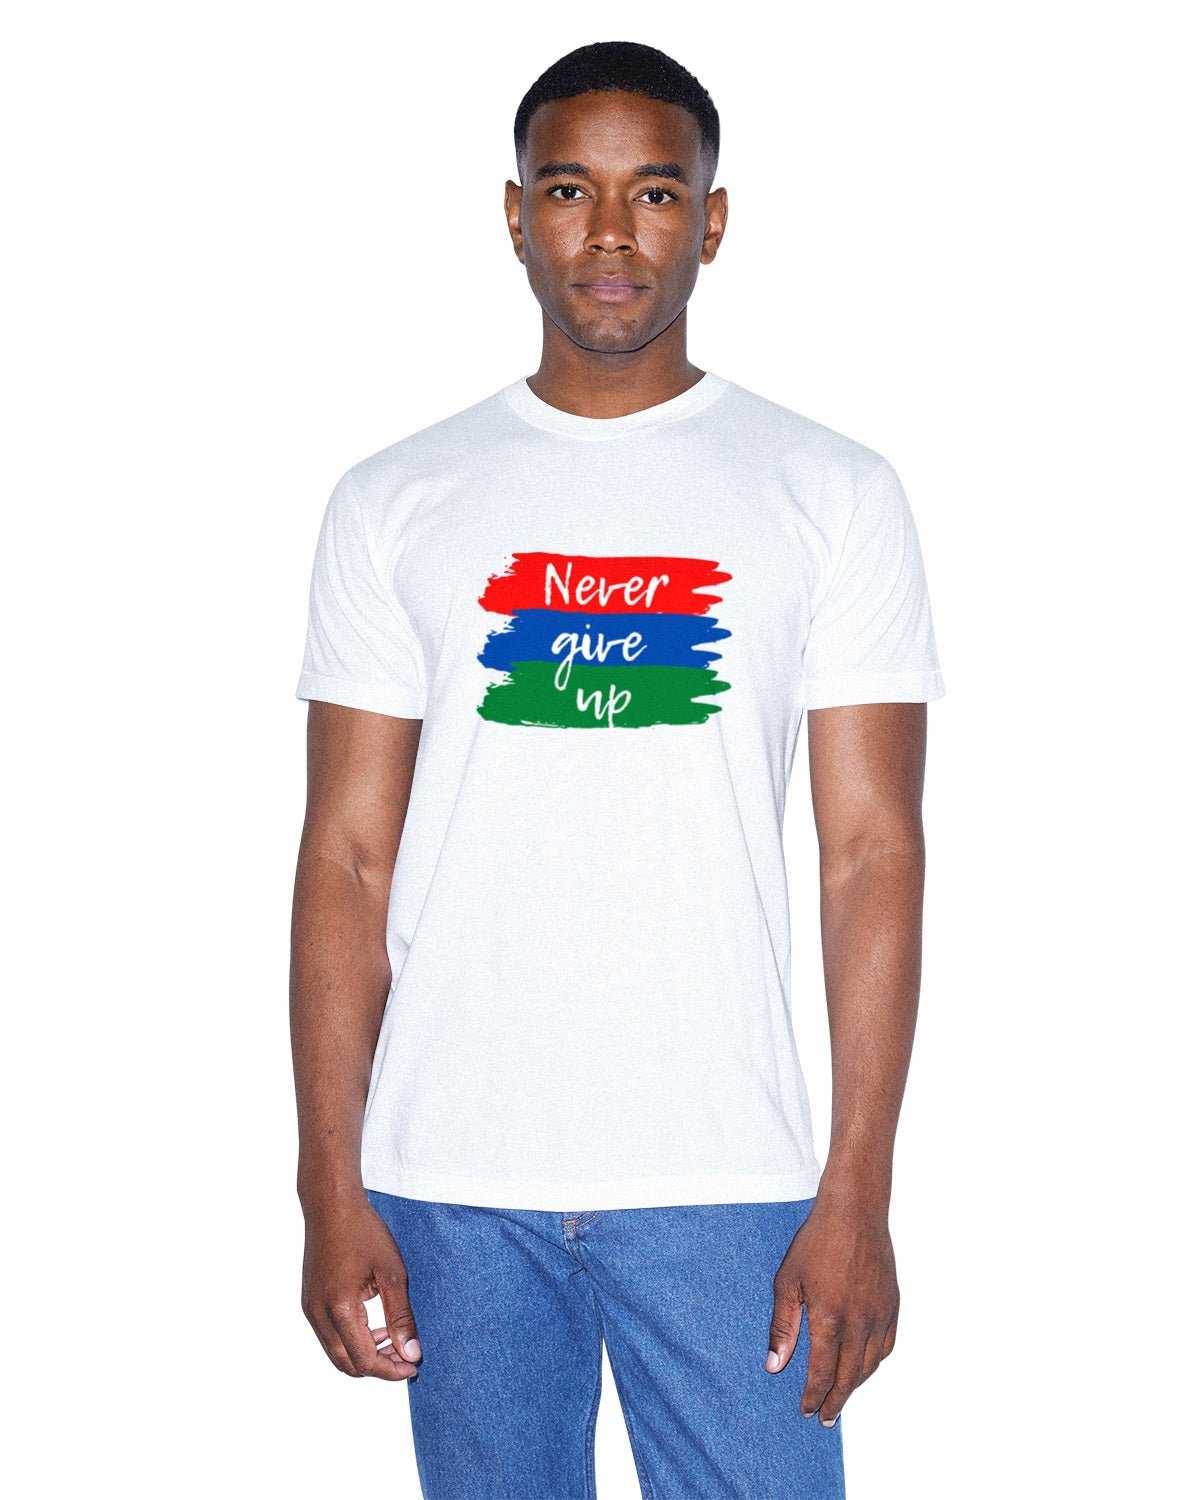 Never Give Up Regular Men's T-Shirt - Hush and Wear